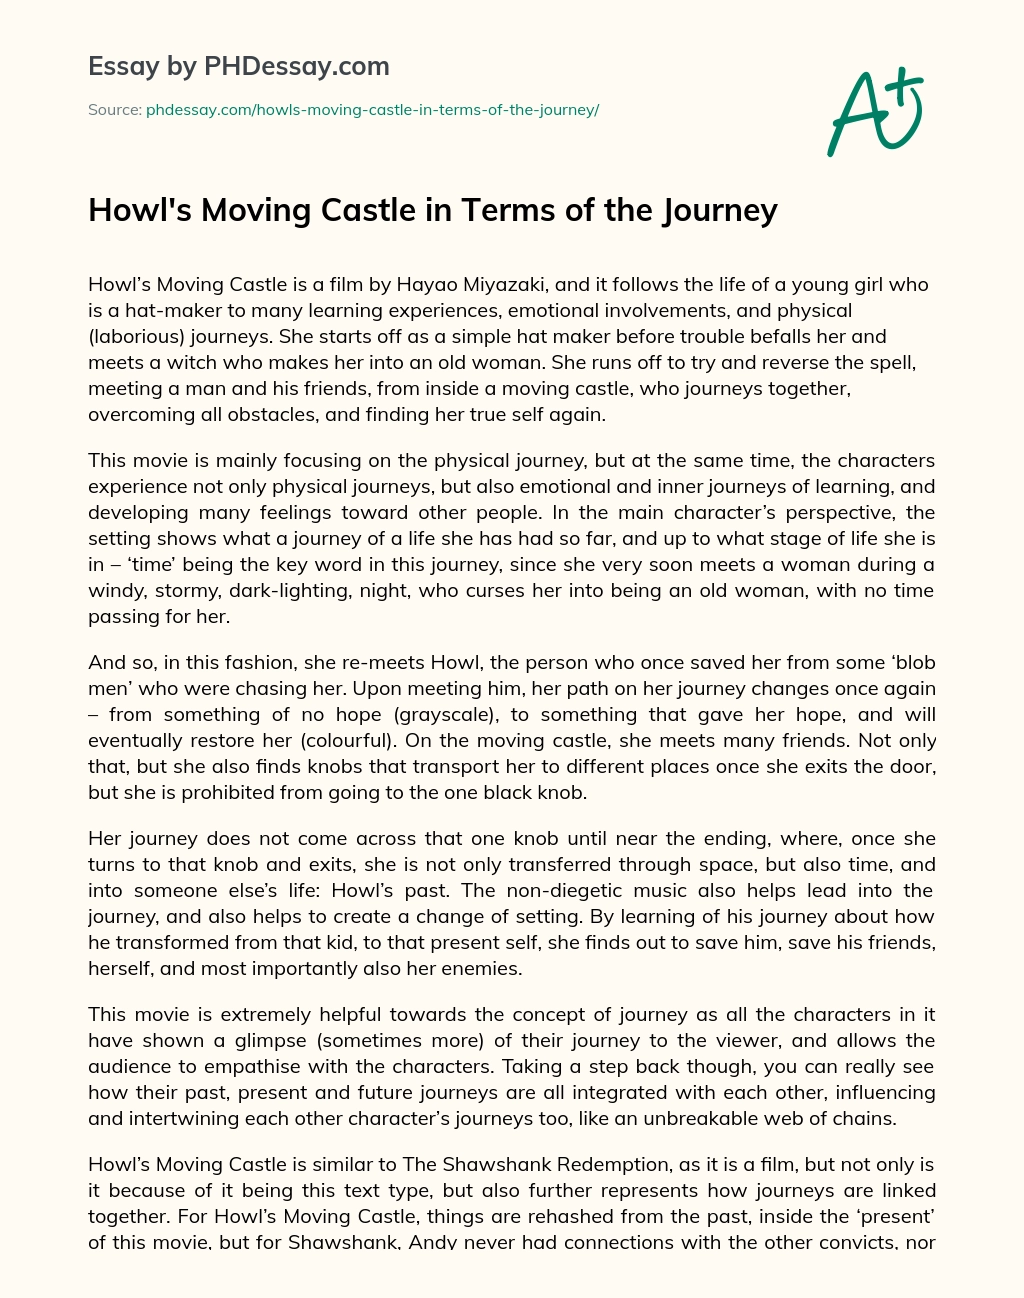 Howl’s Moving Castle in Terms of the Journey essay